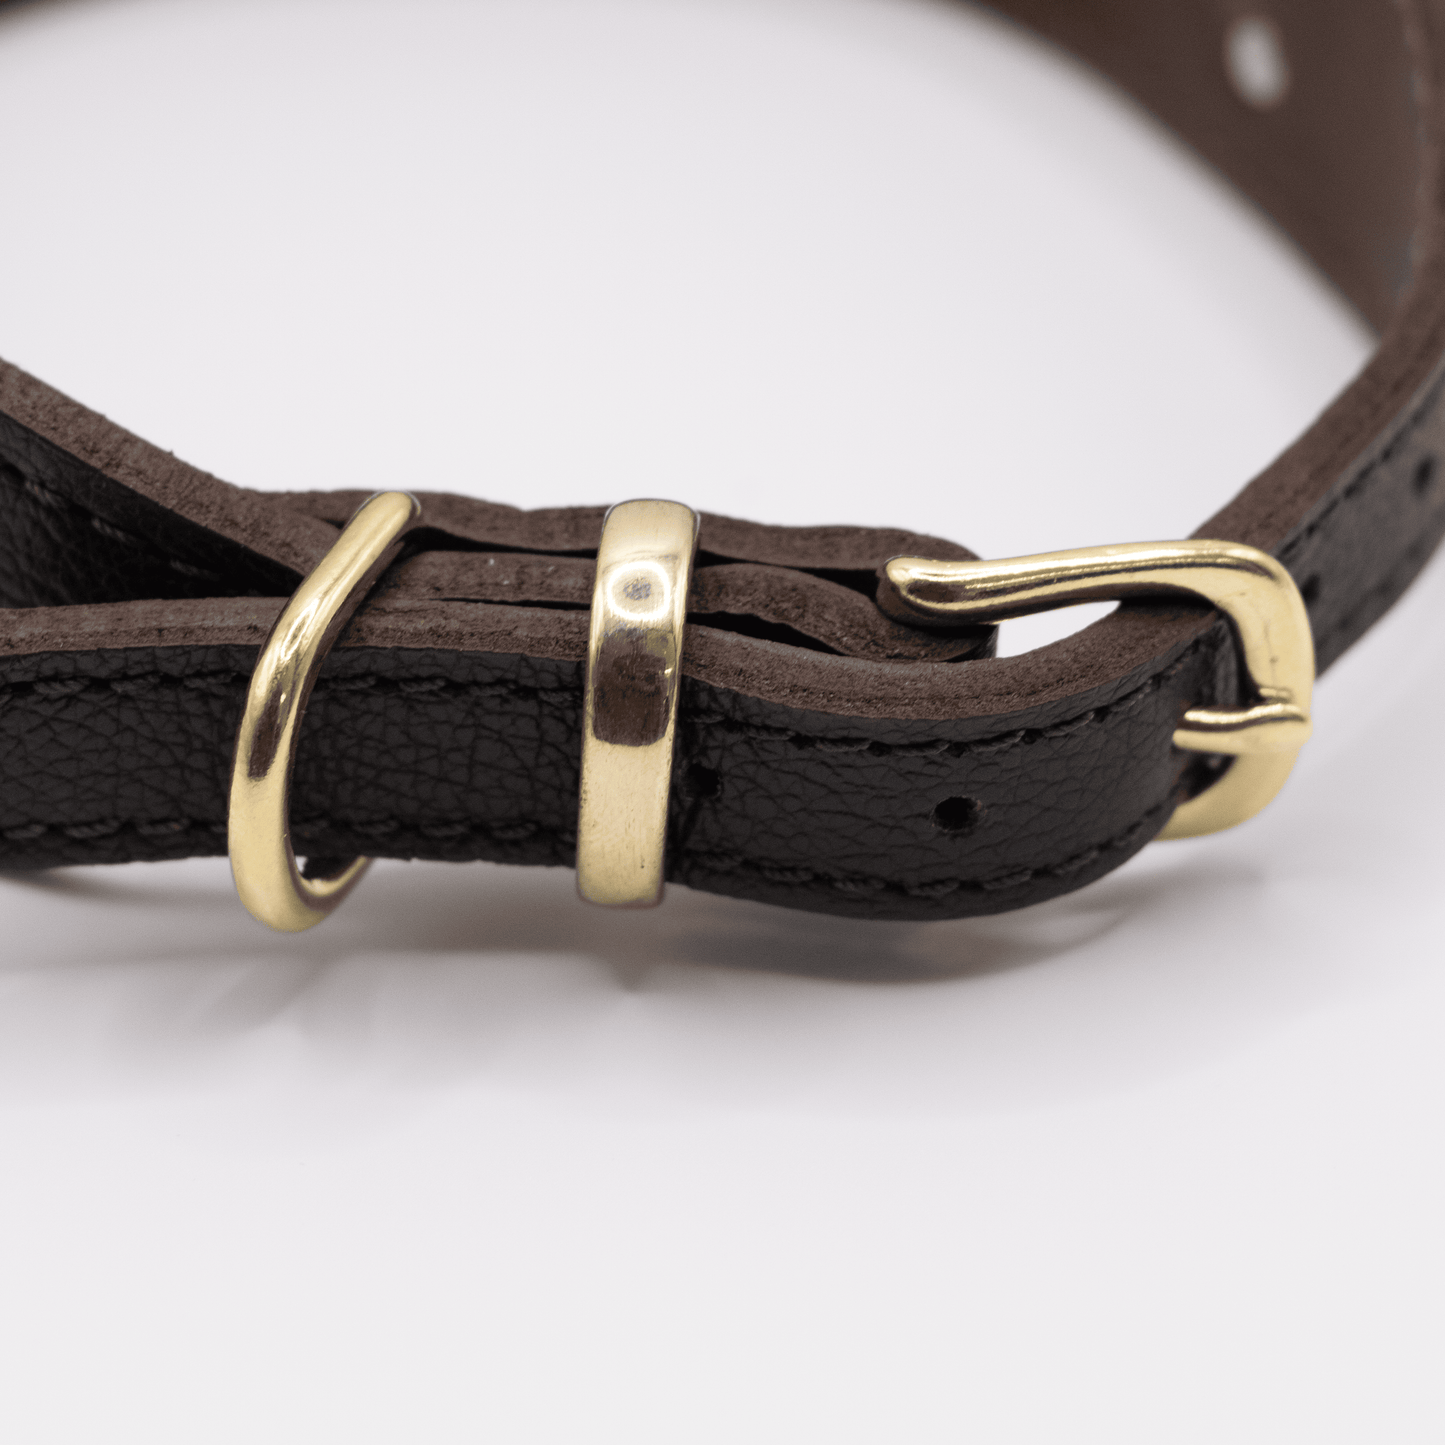 Big Dog Flat and Wider Leather Dog Collar Brown